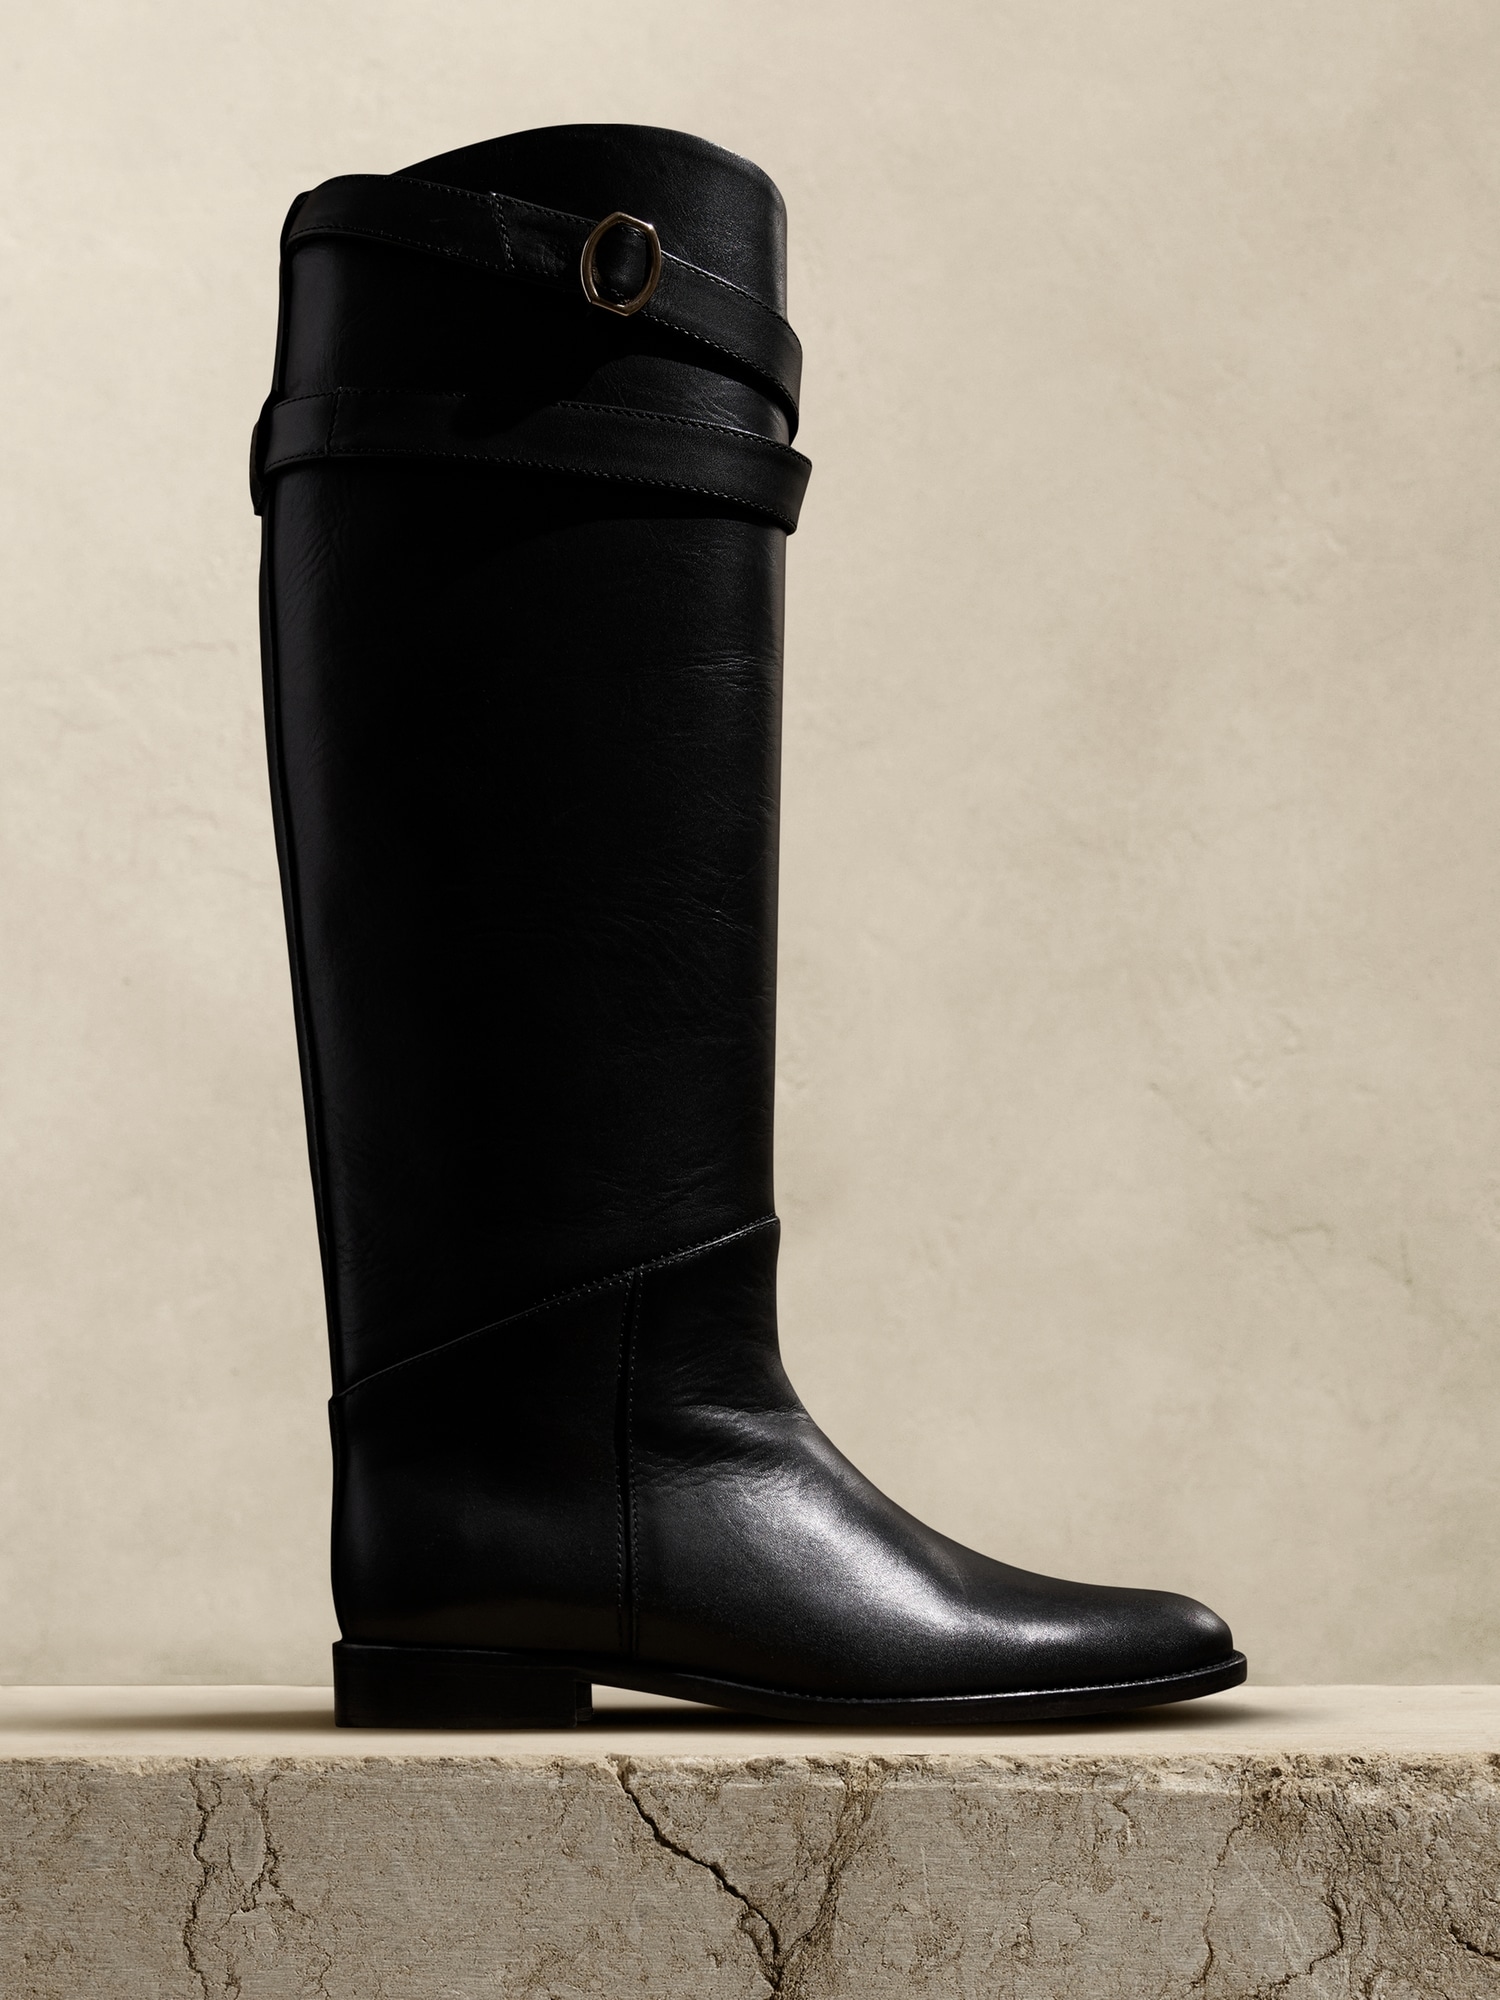 Cheval Leather Riding Boot